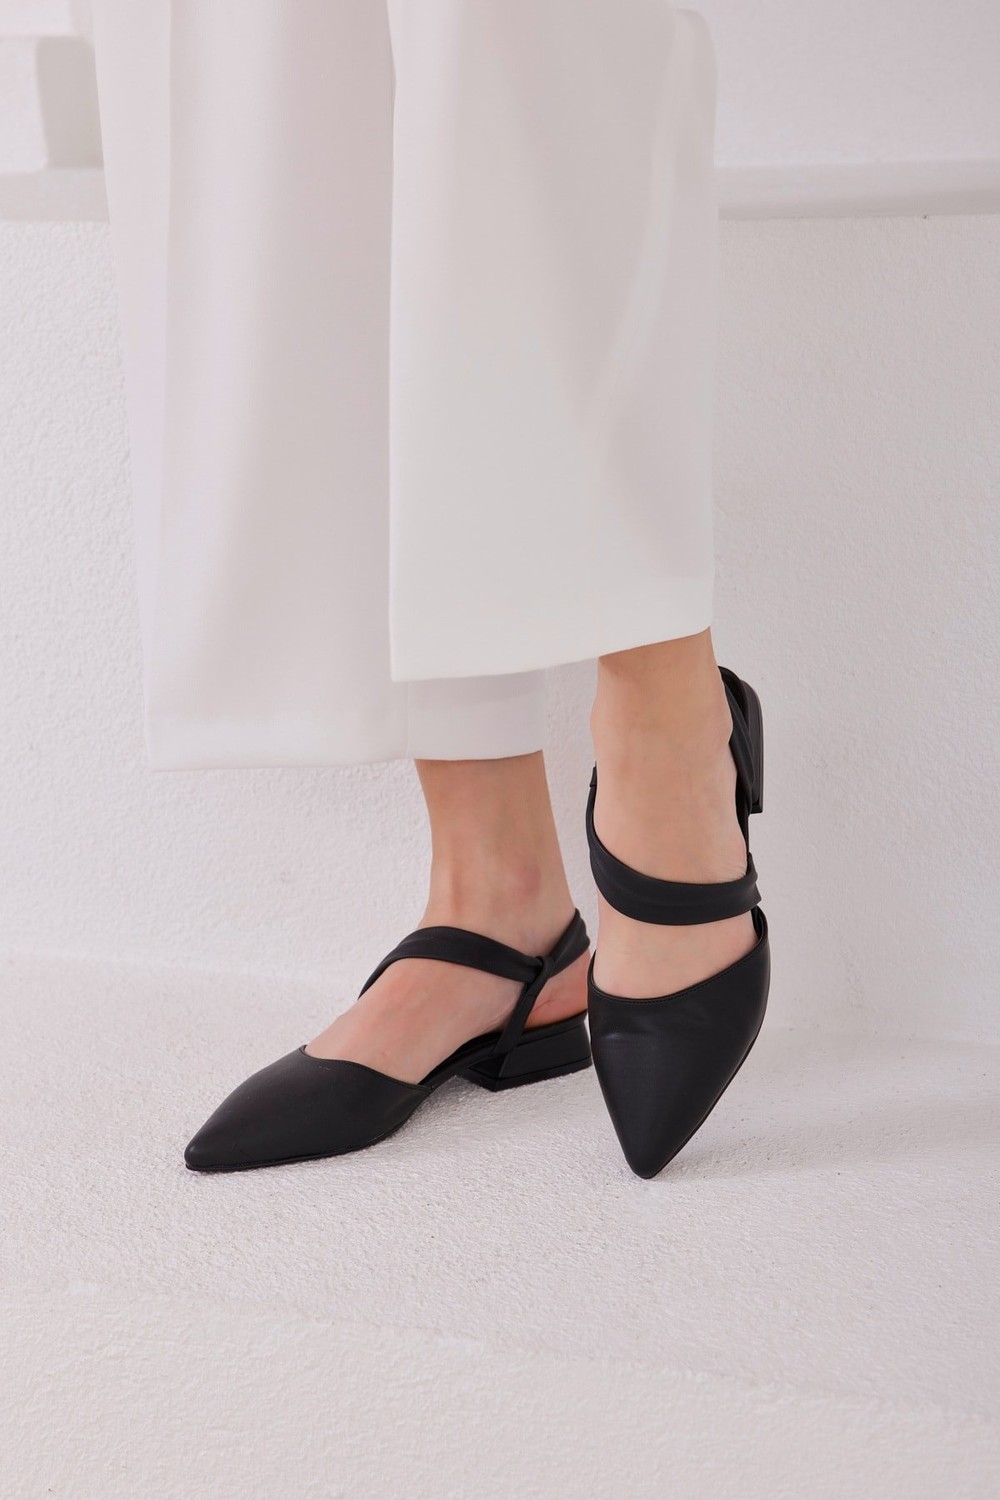 Madamra Black Women's Daily Heeled Flats with Band Detail.